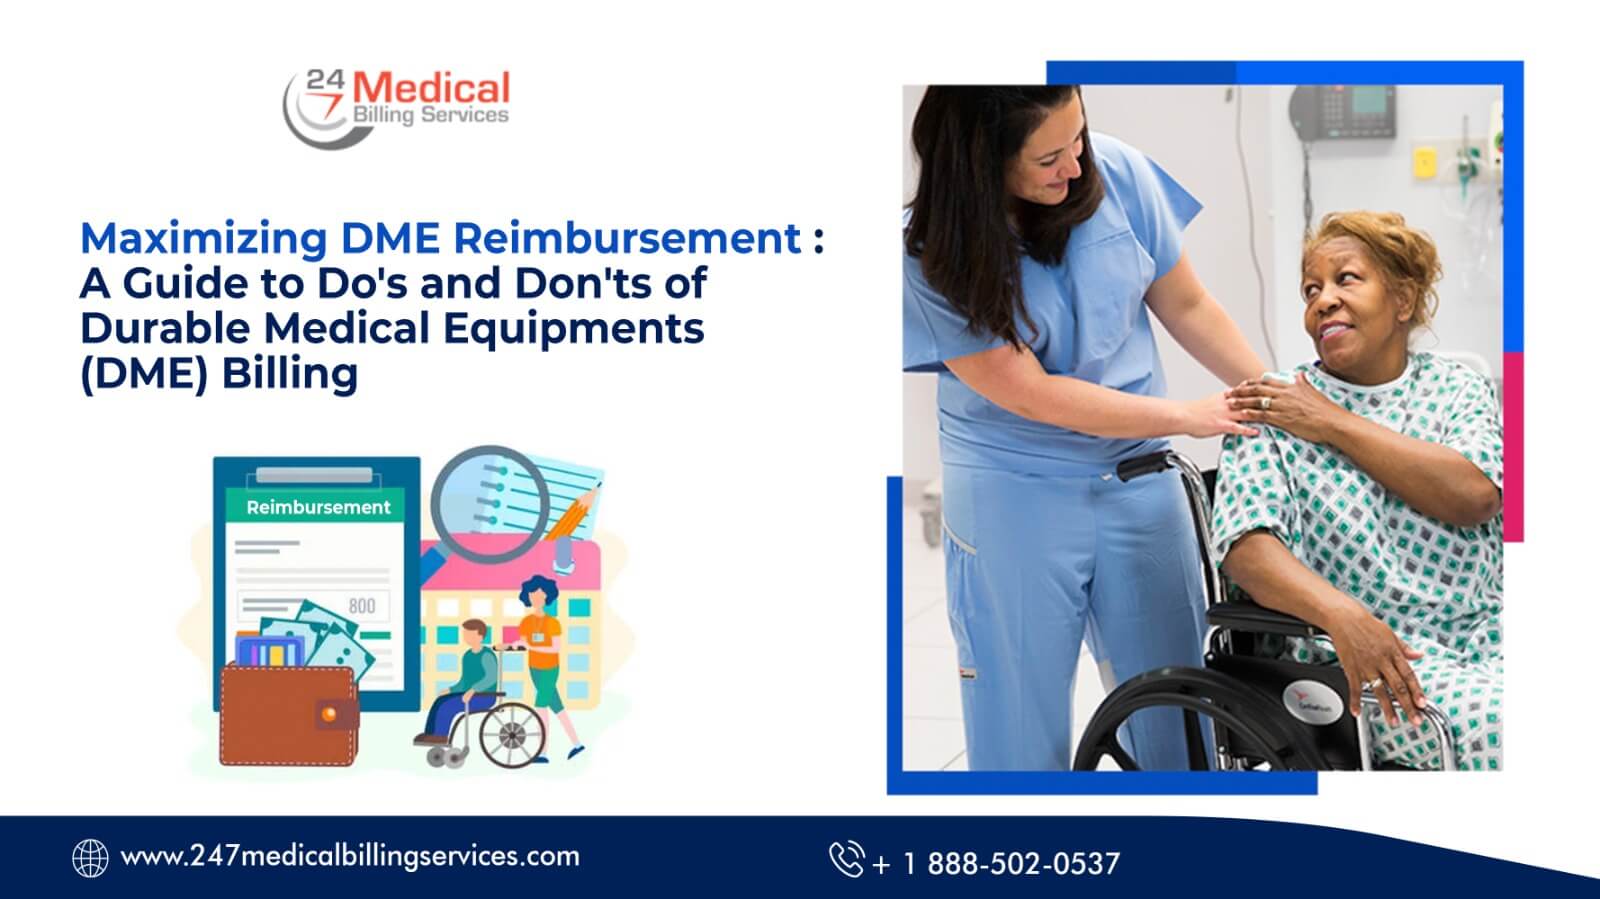  Maximizing DME Reimbursement: A Guide to Do’s and Don’ts of Durable Medical Equipment (DME) Billing